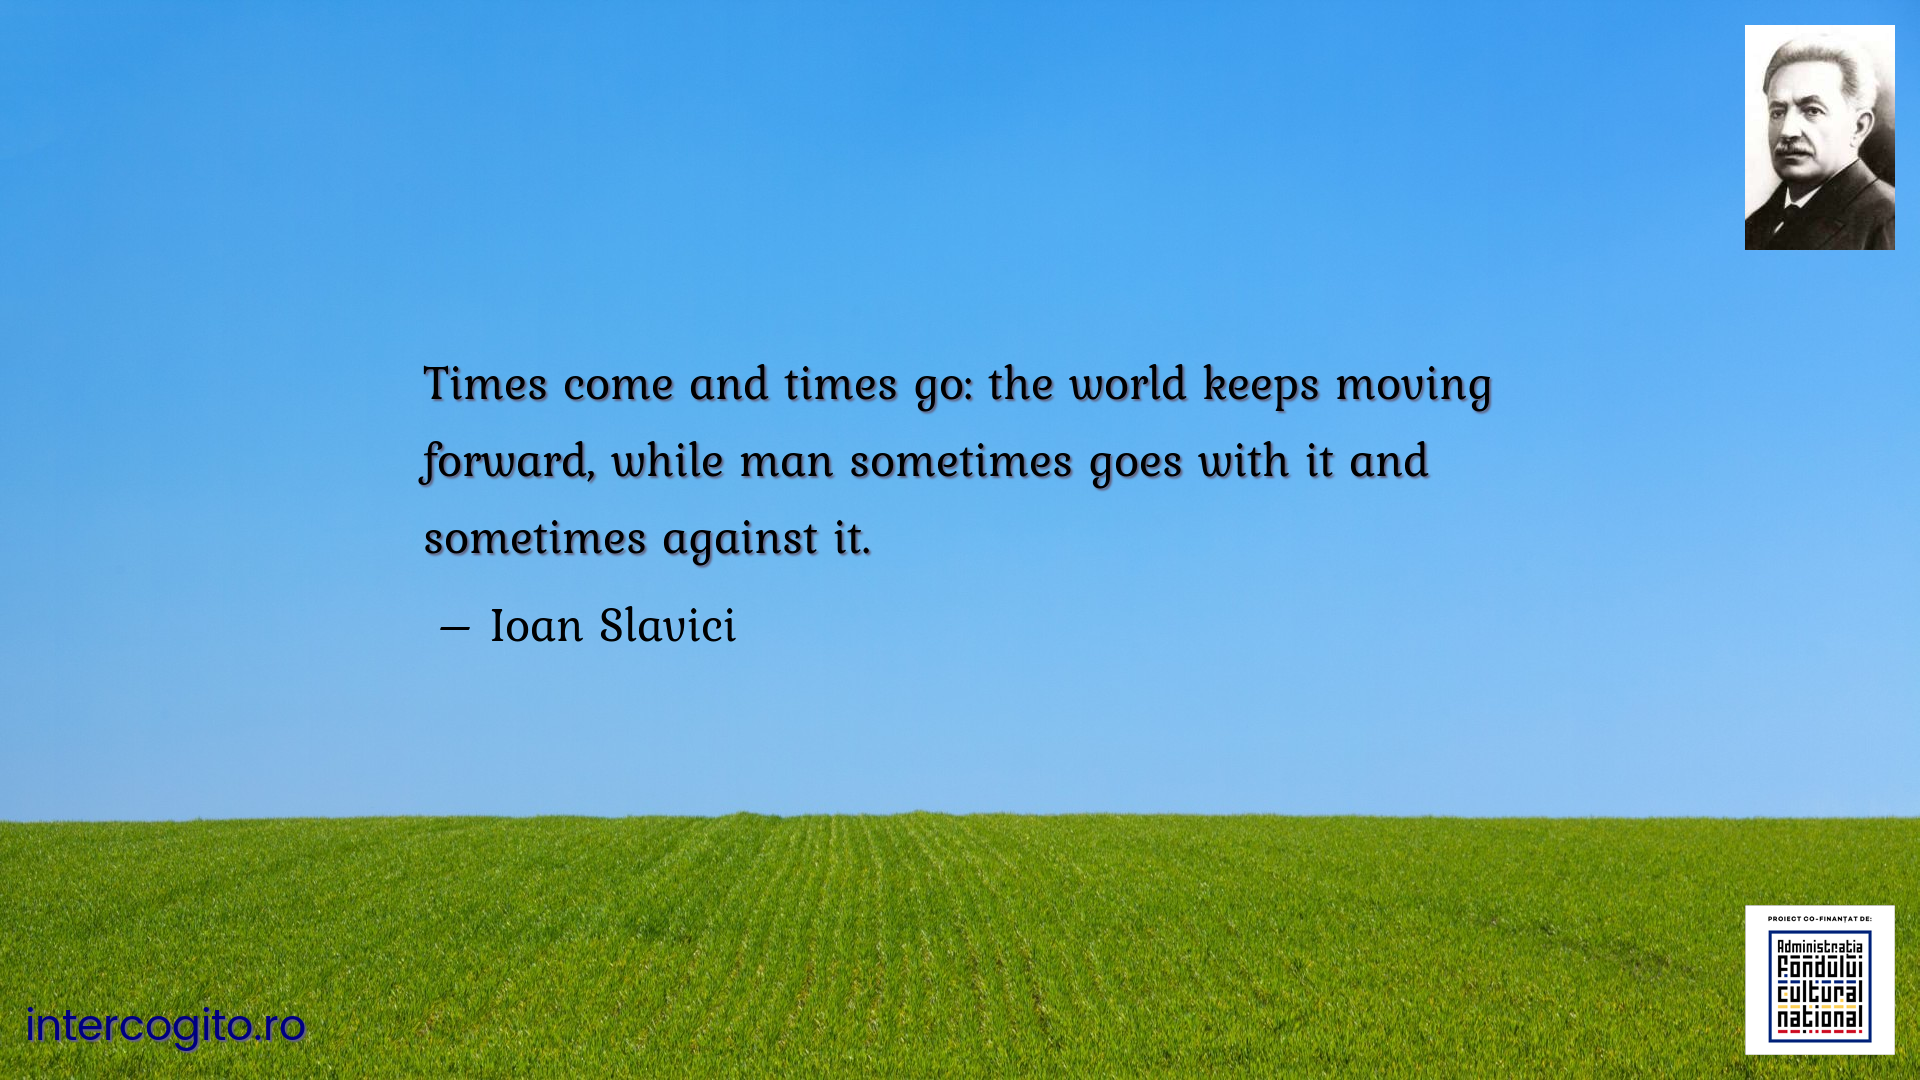 Times come and times go: the world keeps moving forward, while man sometimes goes with it and sometimes against it.